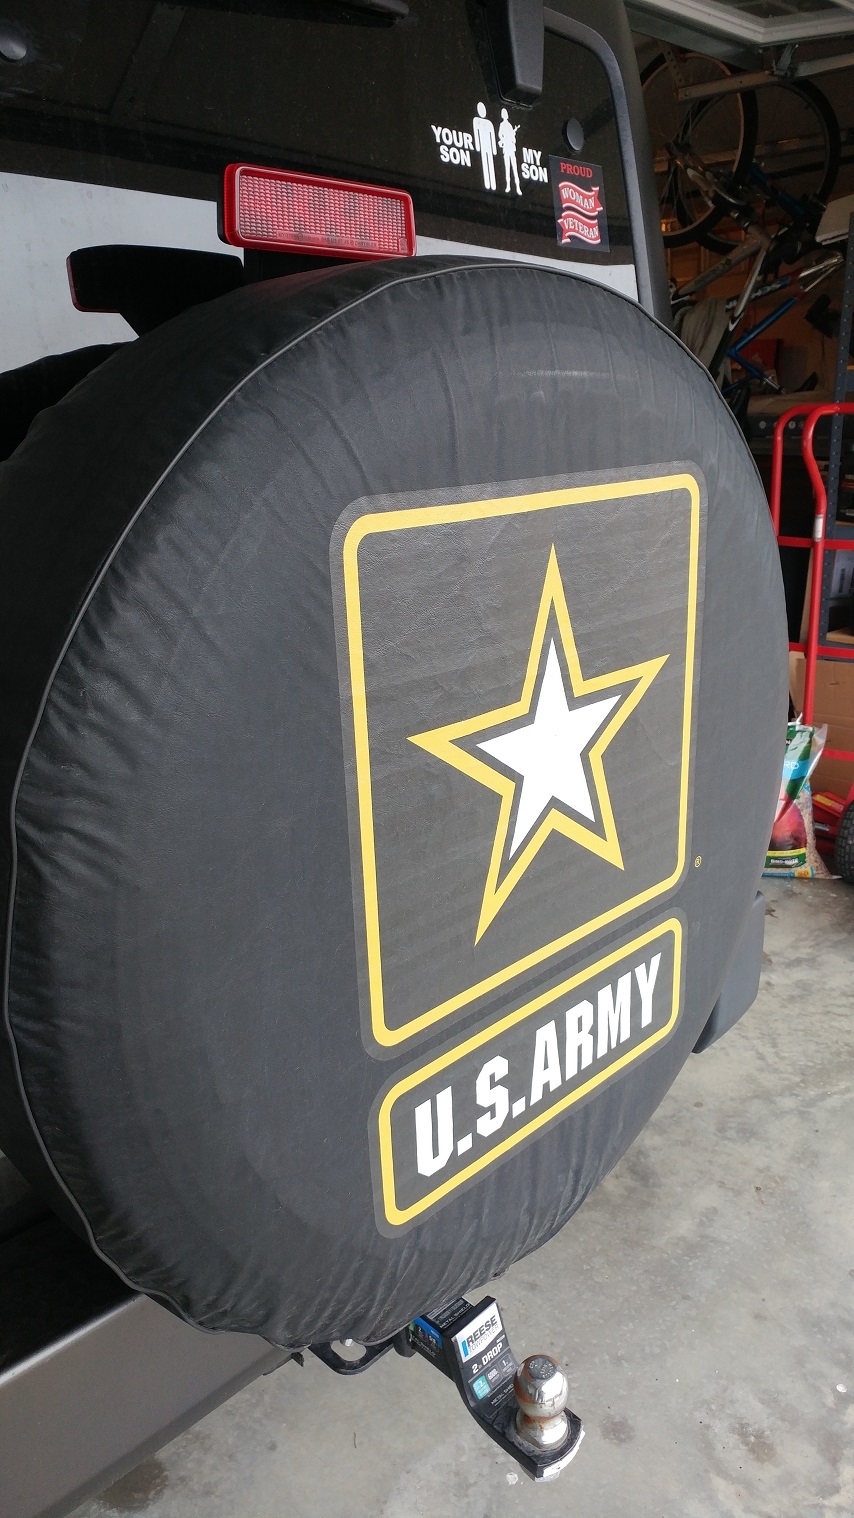 U.S. Army Tire Cover